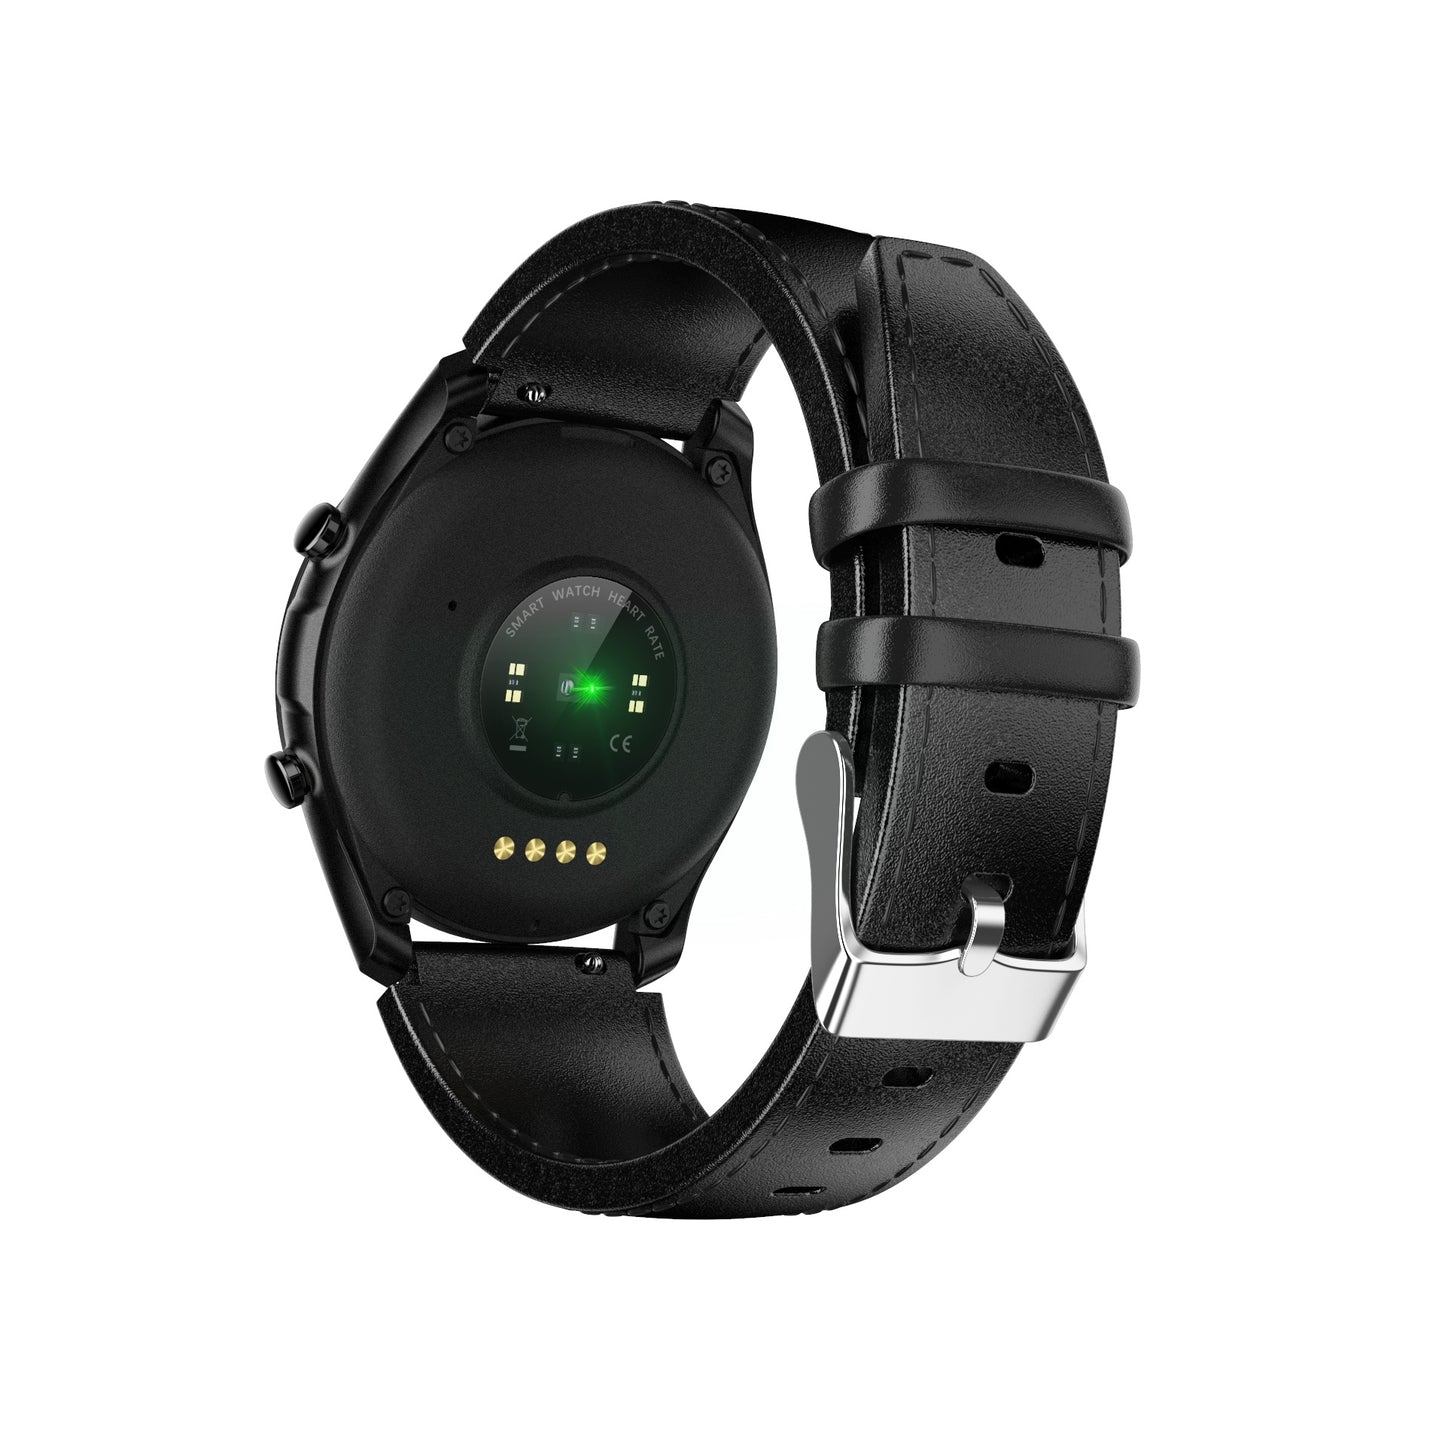 Smart watch can be connected to TWS headset, step counting, sleep monitoring, heart rate, blood pressure recording, smart bracelet, sedentary reminder